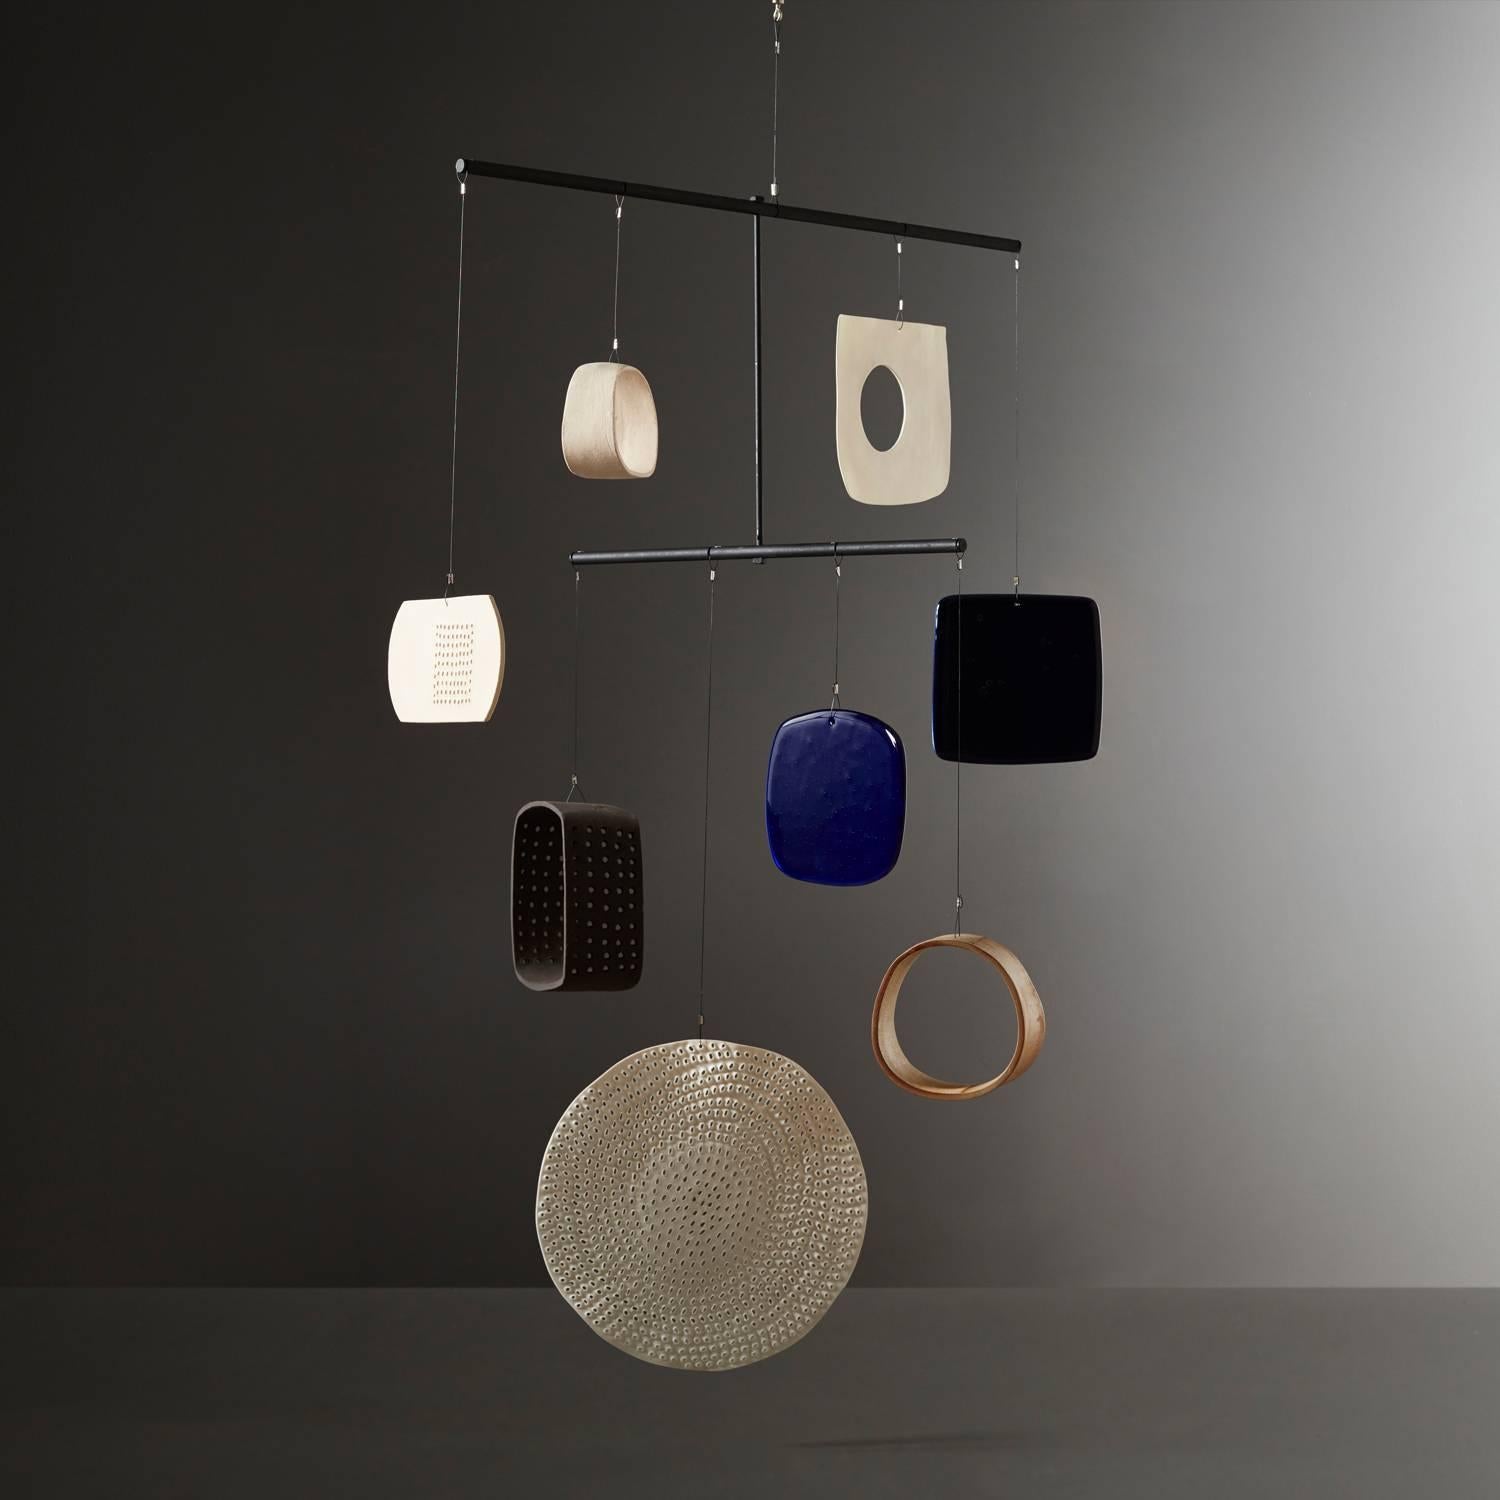 Daniel Reynolds' navy and apothecary blue mobile is a large handmade mobile, composed of a gourd section, porcelain, stoneware, and glass shapes in varying hues. Adhering to a simple colour palette of black, white, blue and cream Daniel Reynold’s